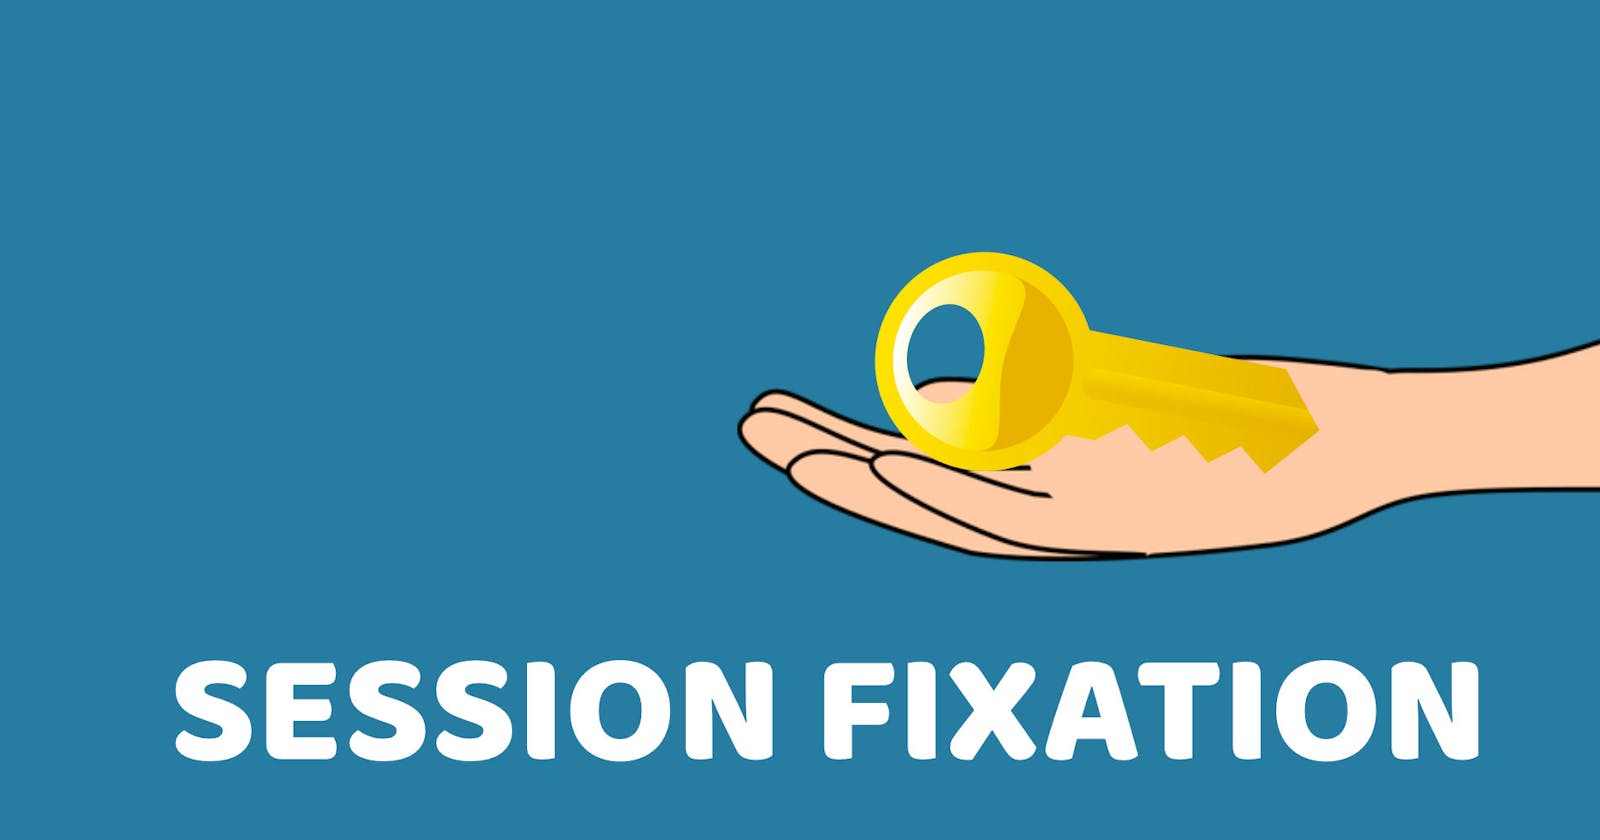 Session Fixation Attacks and Prevention